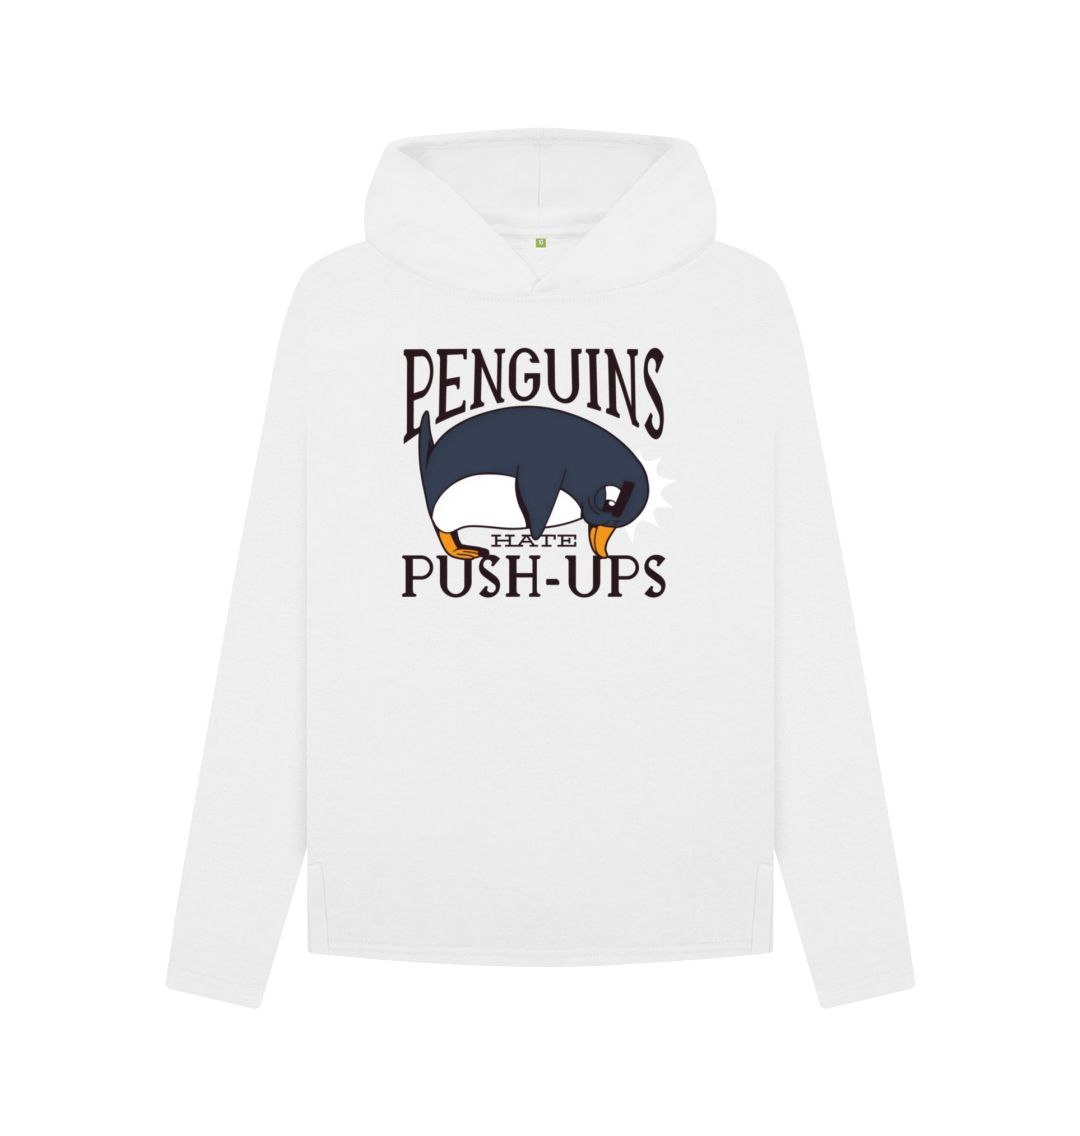 White Penguins Hate Push-Ups Women's Relaxed Fit Hoodie